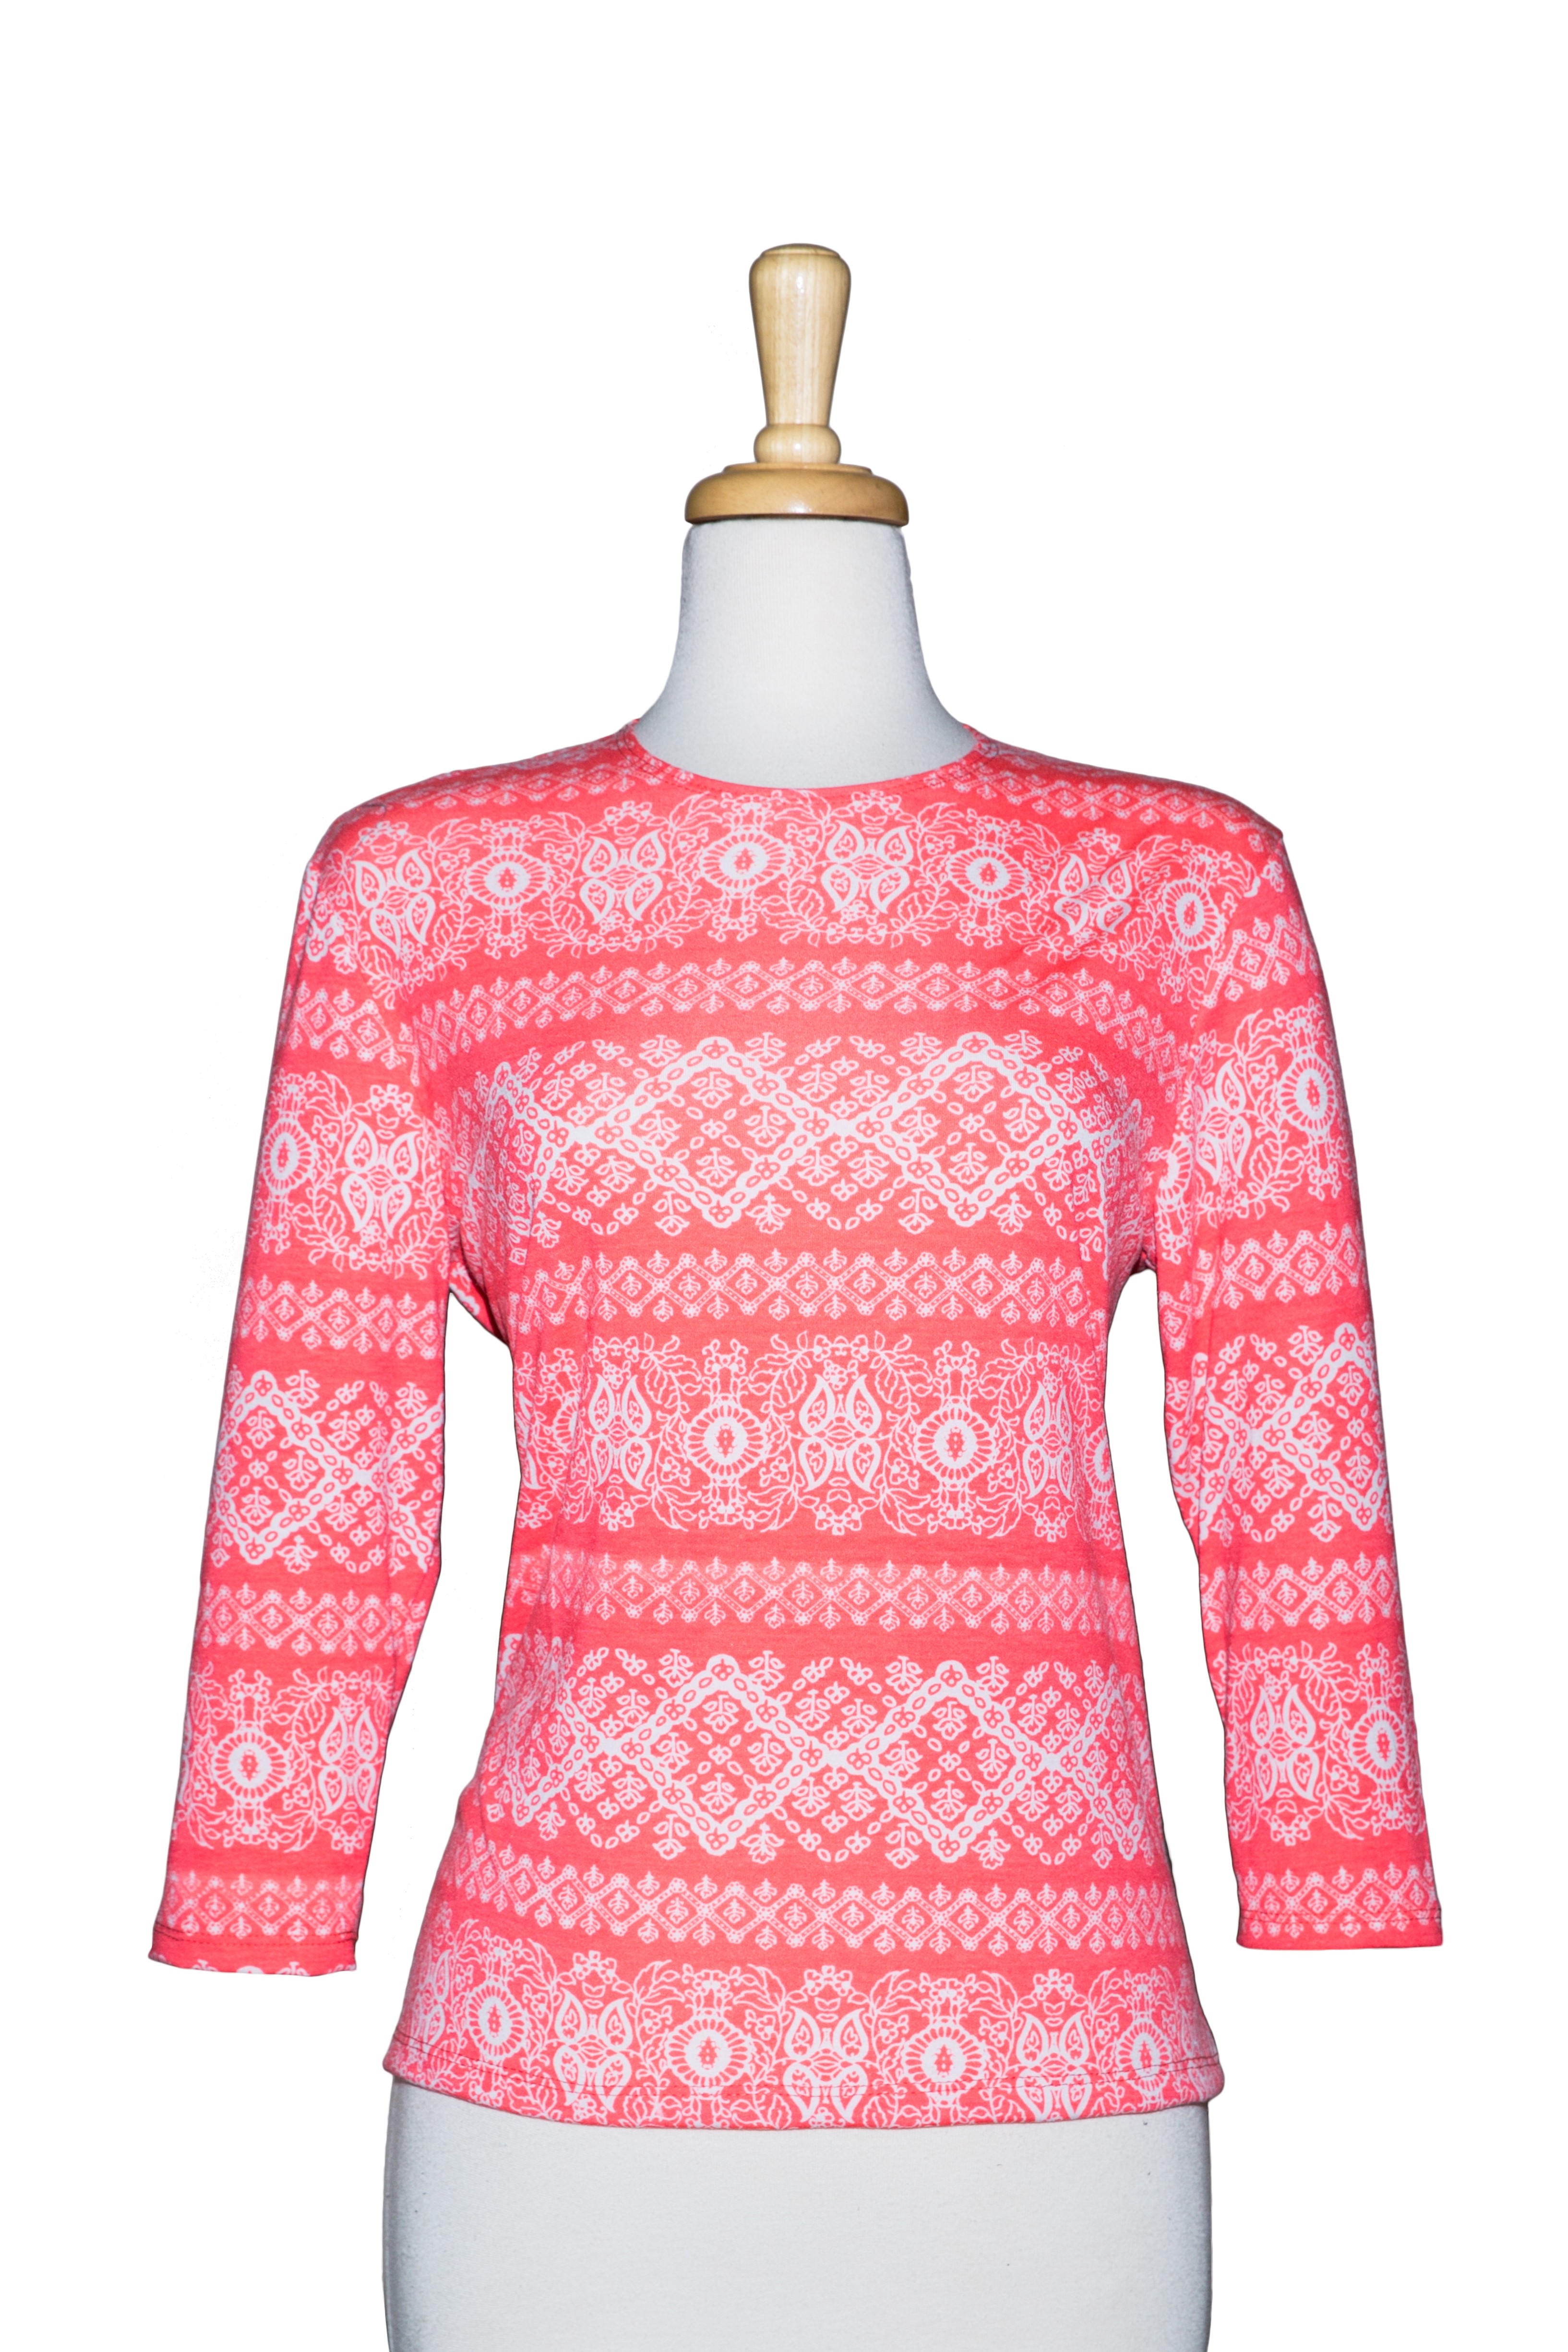 Coral and White Diamonds 3/4 Sleeve  Cotton Top 